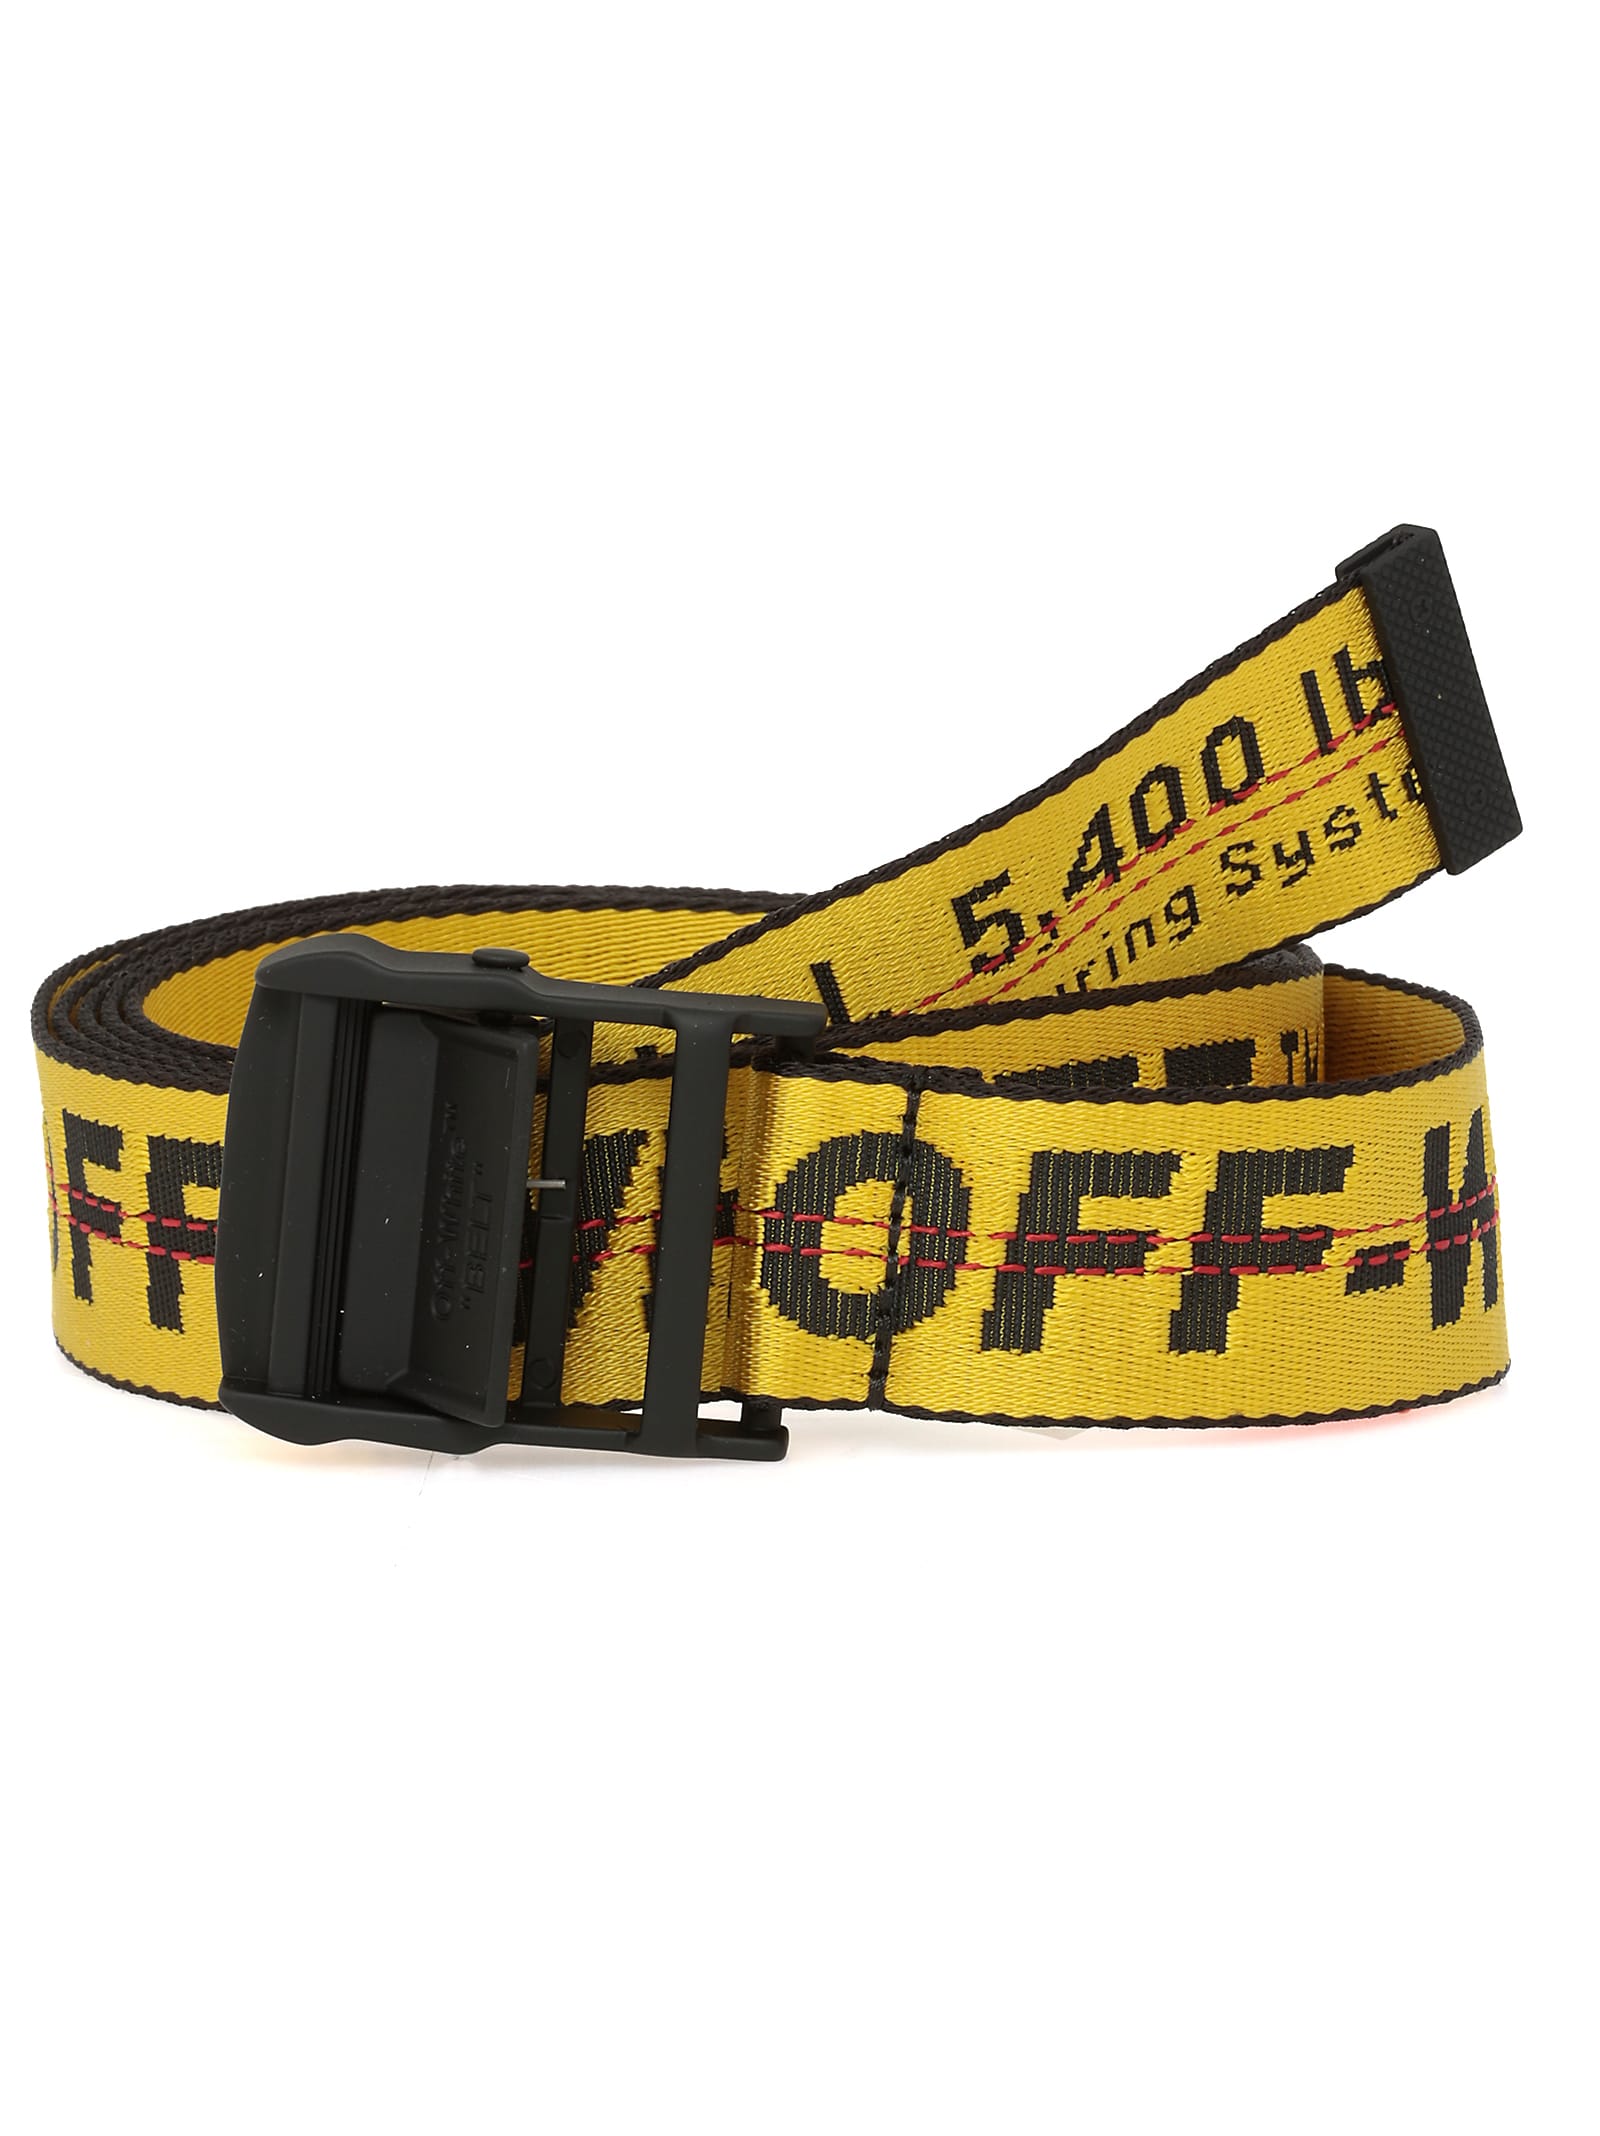 Off-White Off-White Classic Industrial Belt - YELLOW BLACK - 11017185 ...